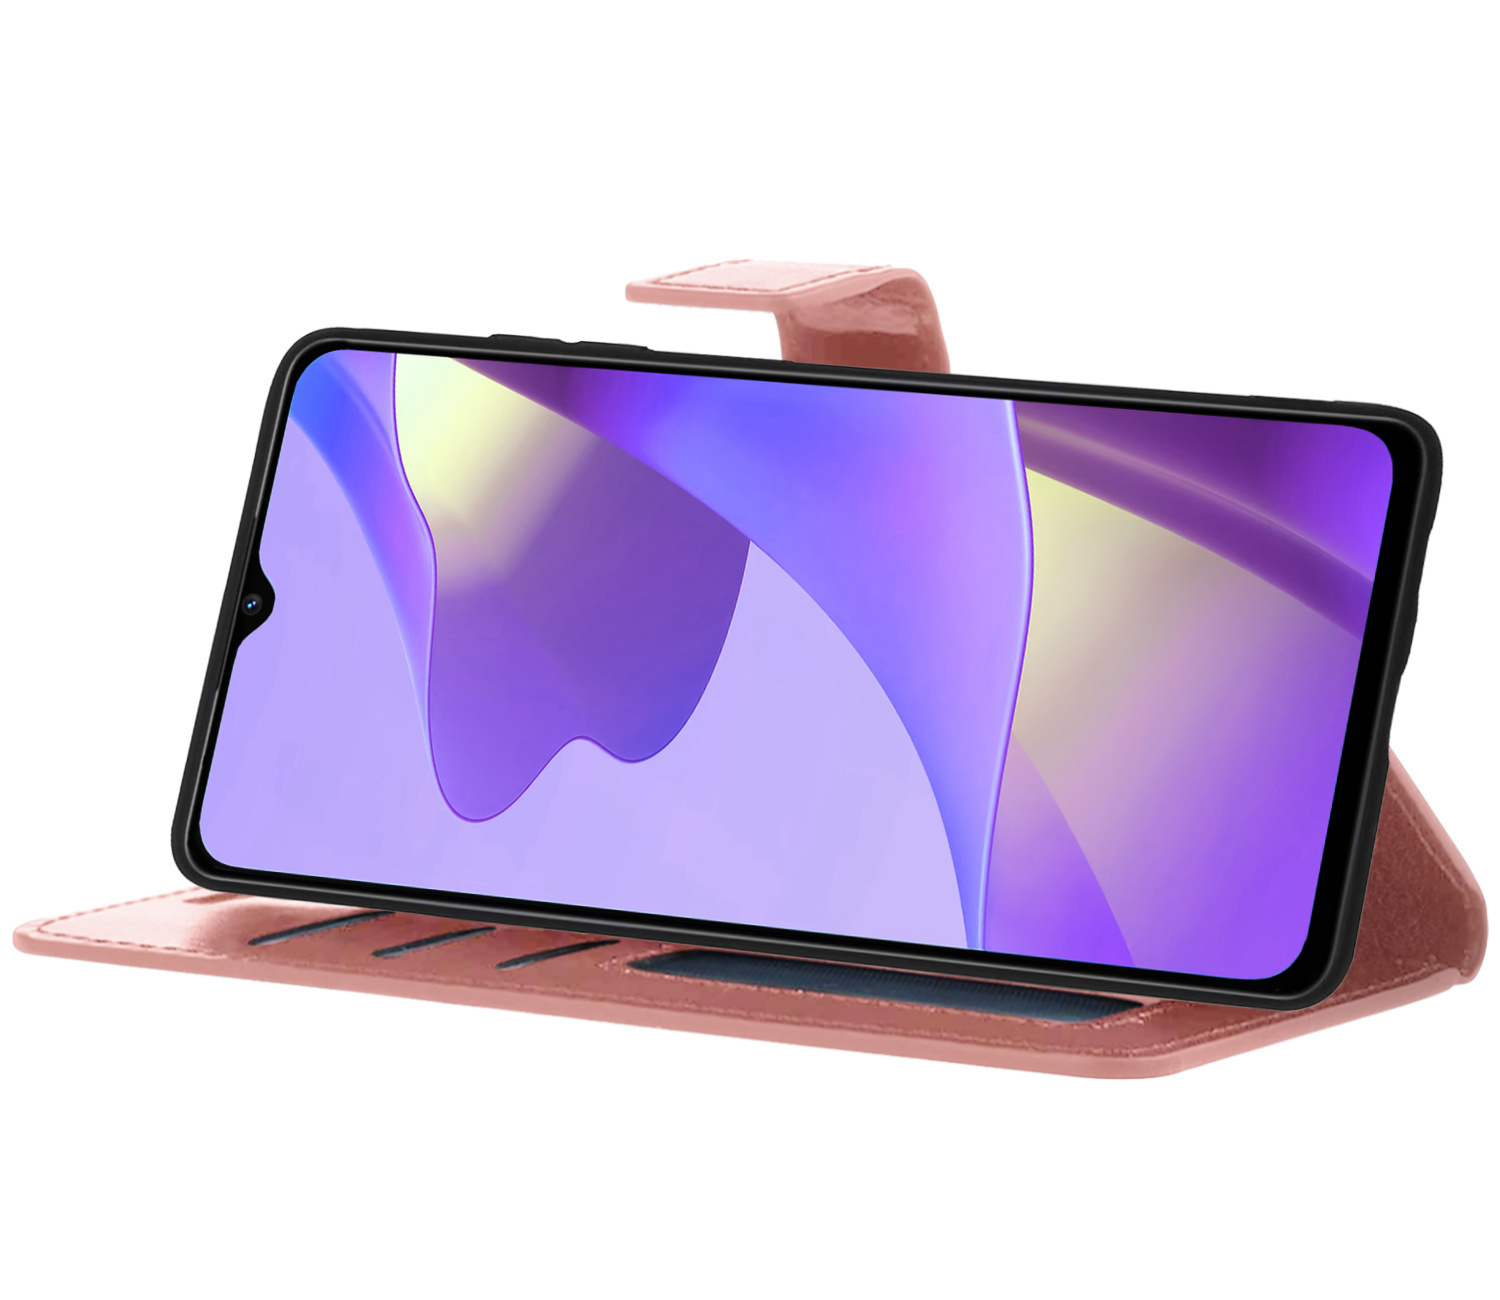 Nomfy OPPO A16s Hoesje Bookcase Met Screenprotector - OPPO A16s Screenprotector - OPPO A16s Book Case Met Screenprotector Rose Goud